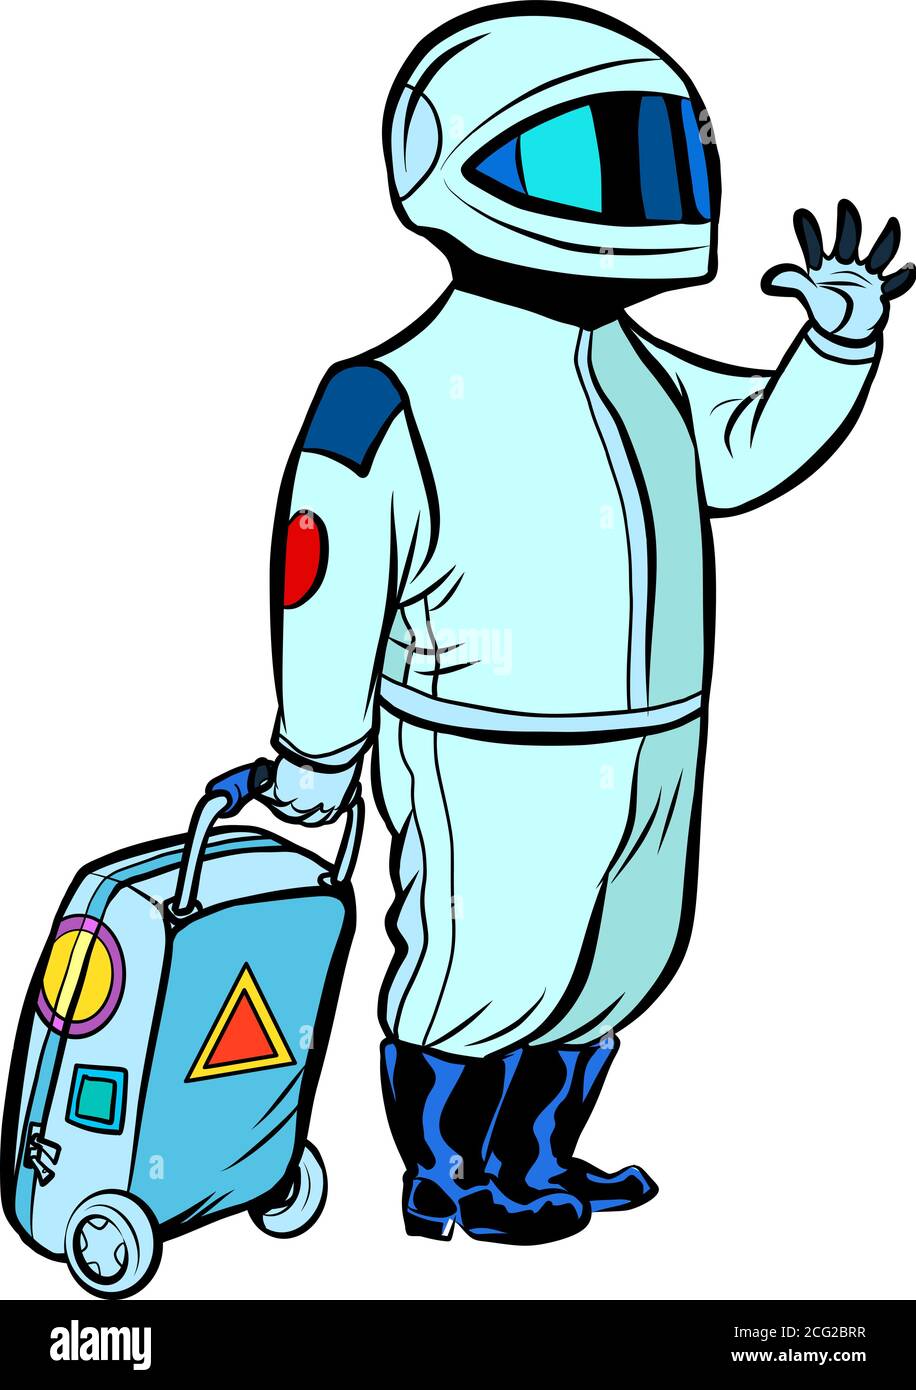 Astronaut traveler with a travel suitcase Stock Vector